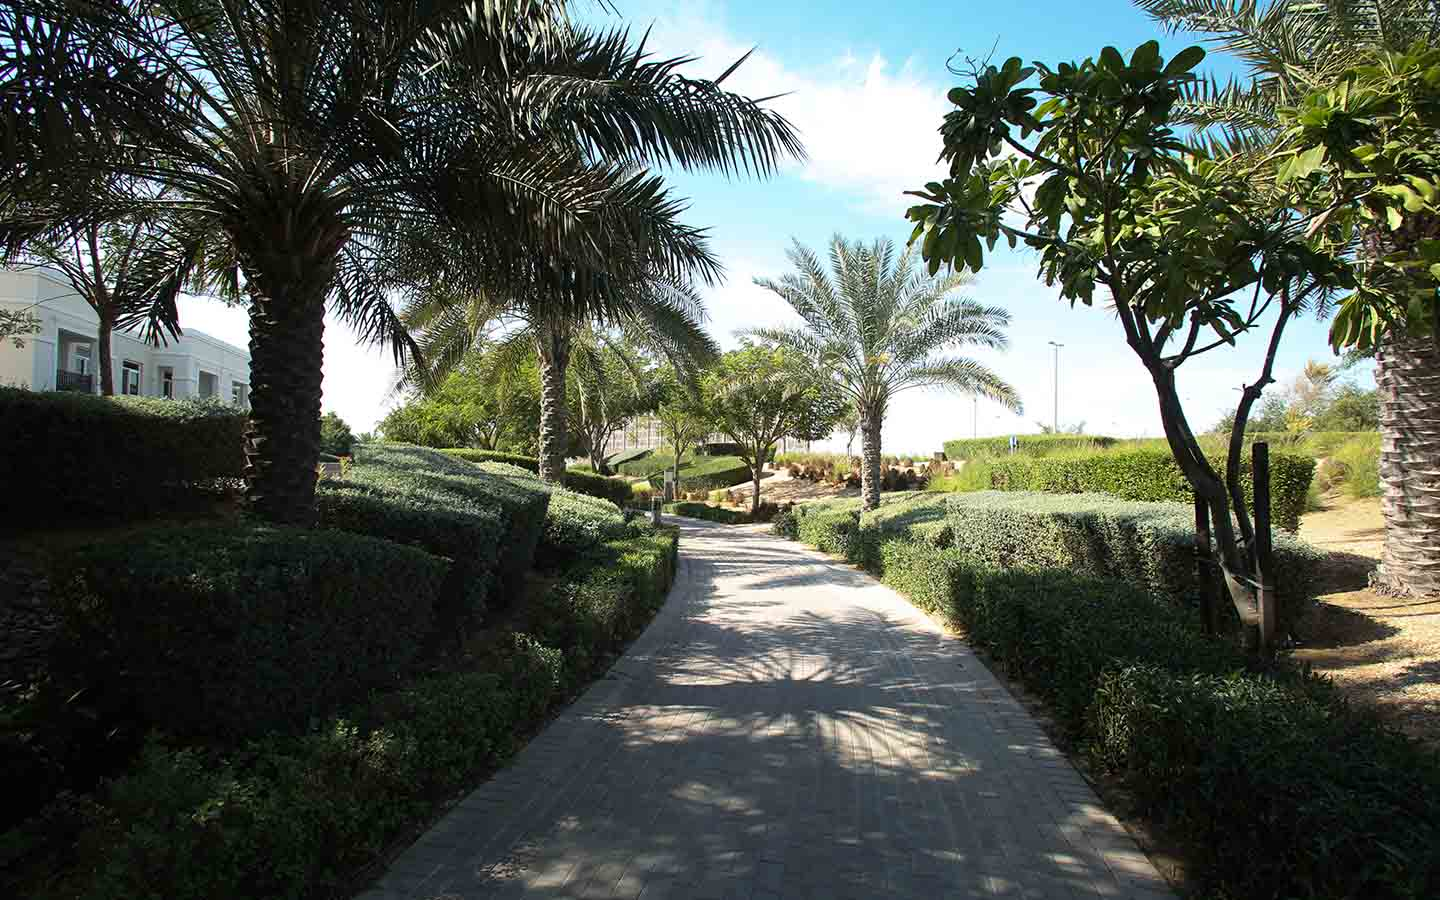 Al Reef has lush green spaces that uplift the natural environment